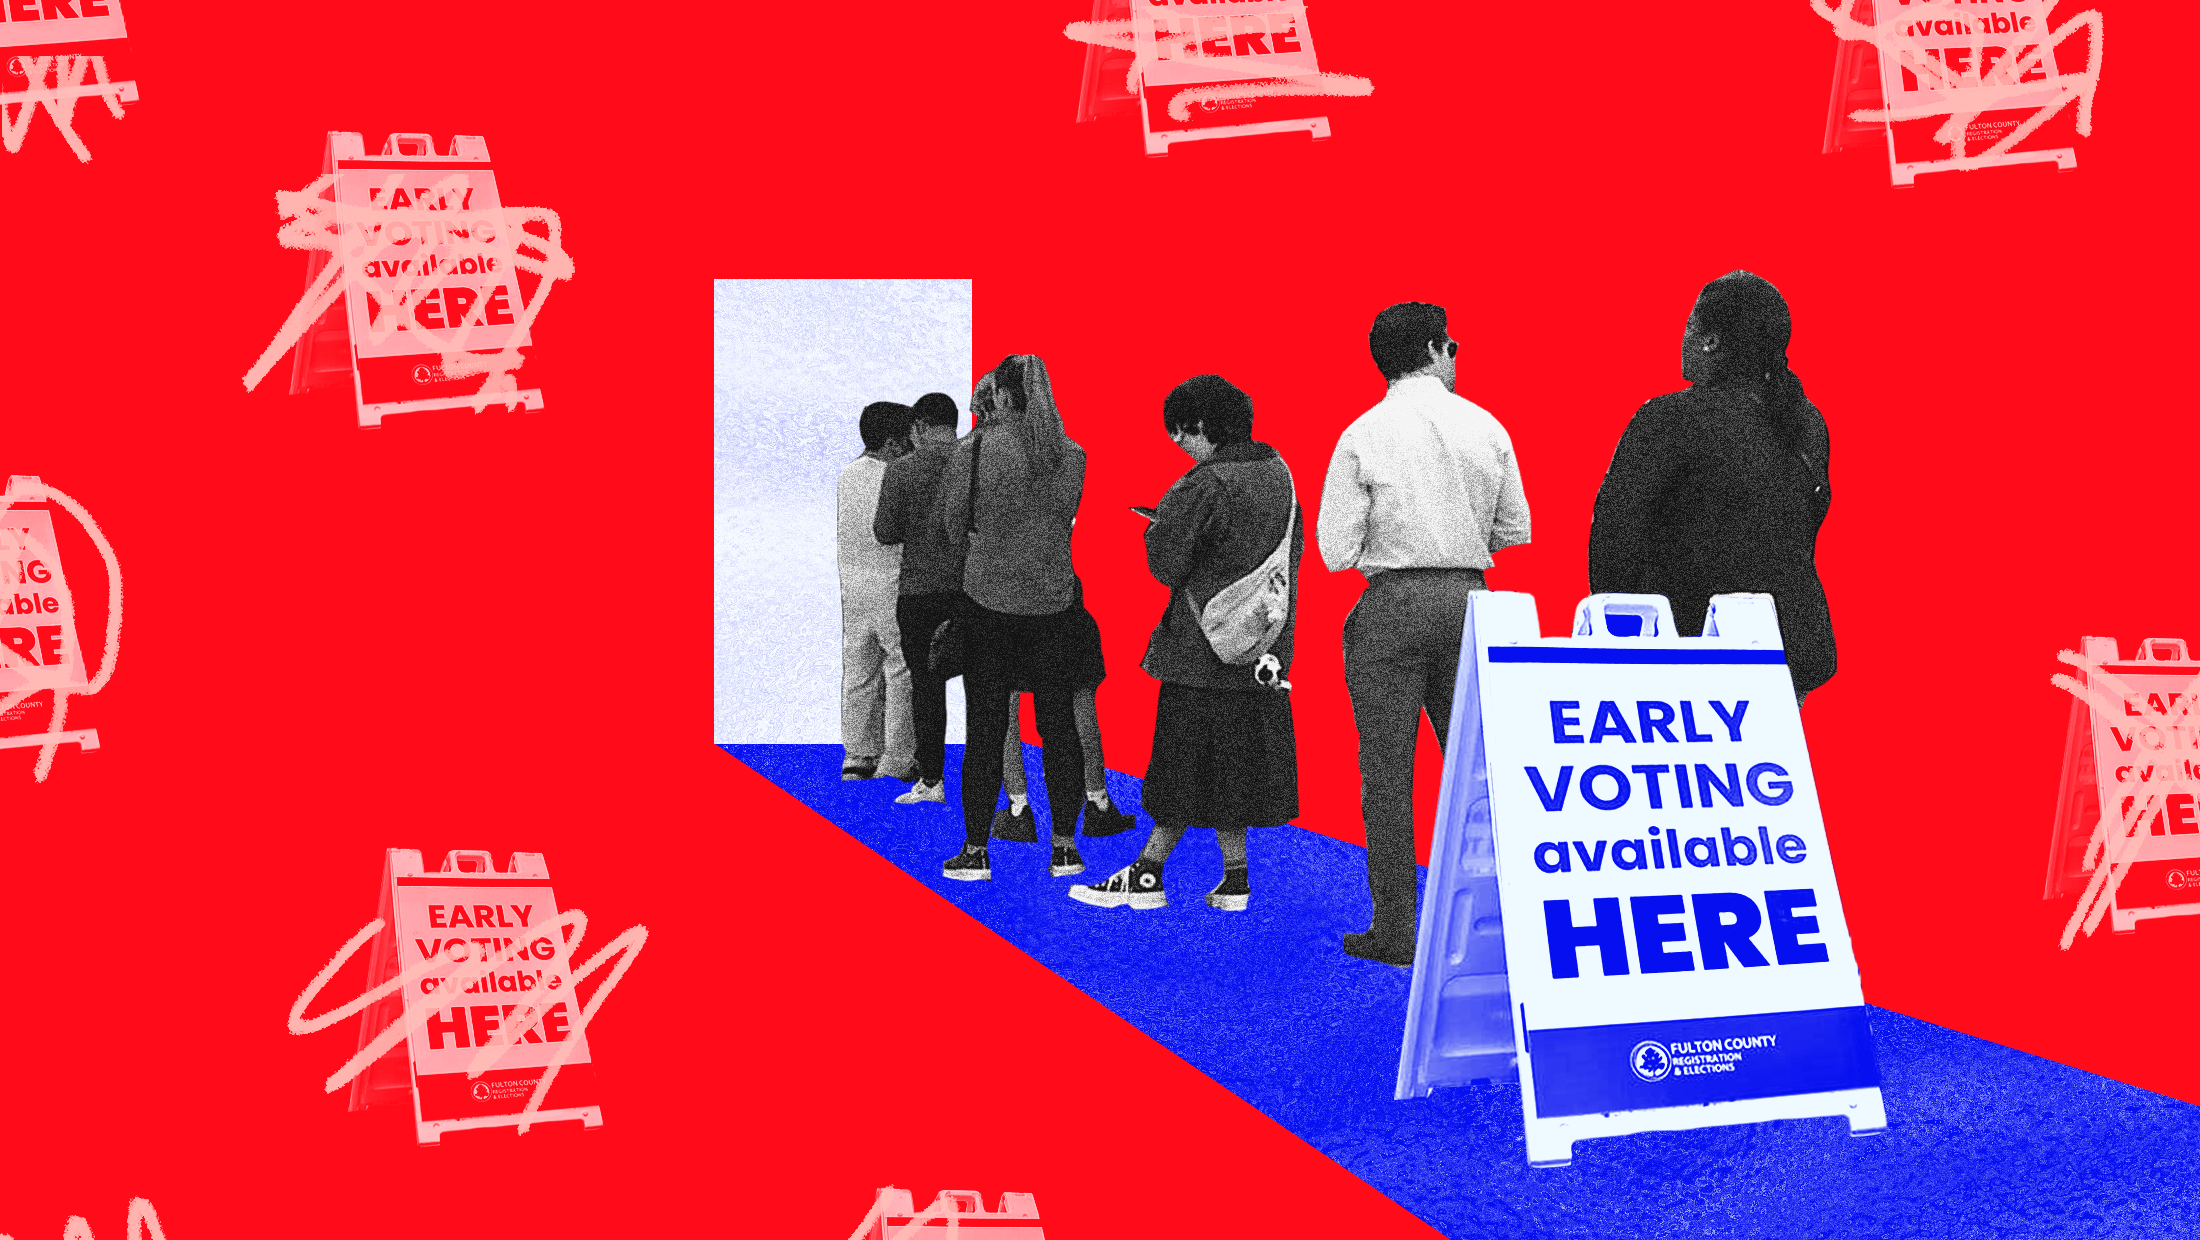 Red background with Early Voting signs with scribbles on top faded into the background and a line of people waiting to vote on a blue carpet standing next to a sign that reads "Early Voting Available Here."